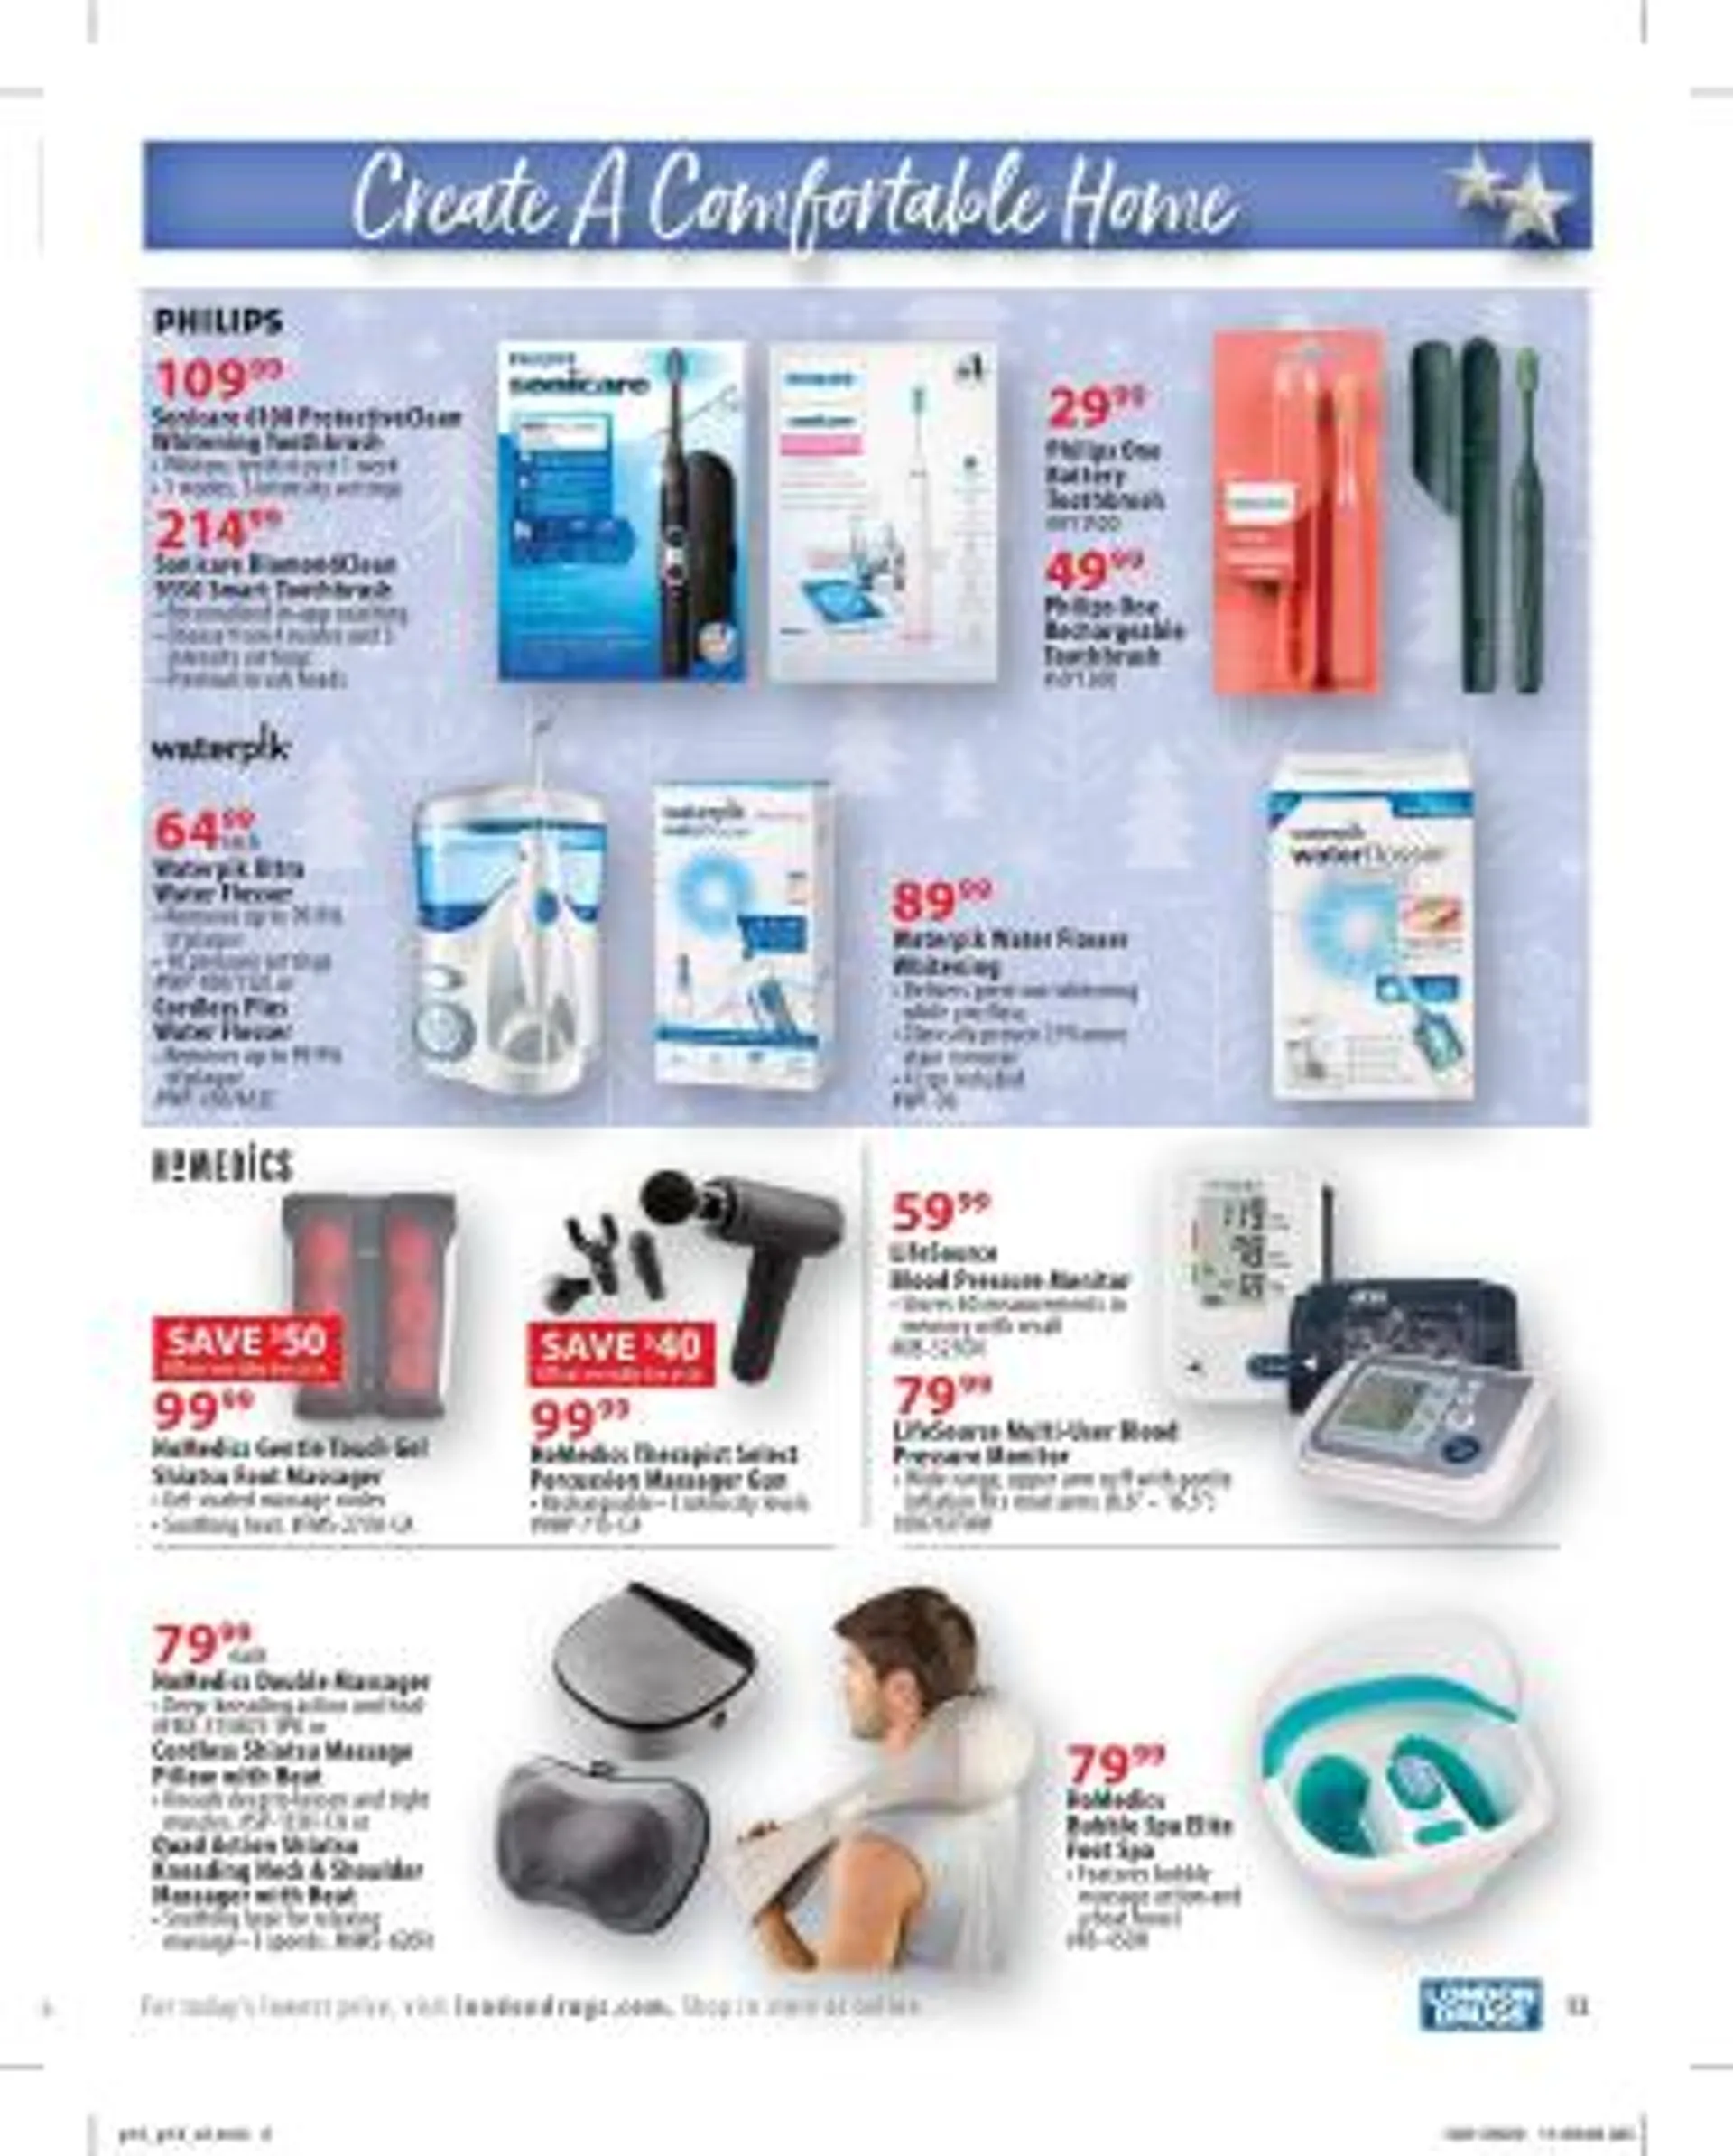 London Drugs Flyer - Holiday Gift Guide - 2